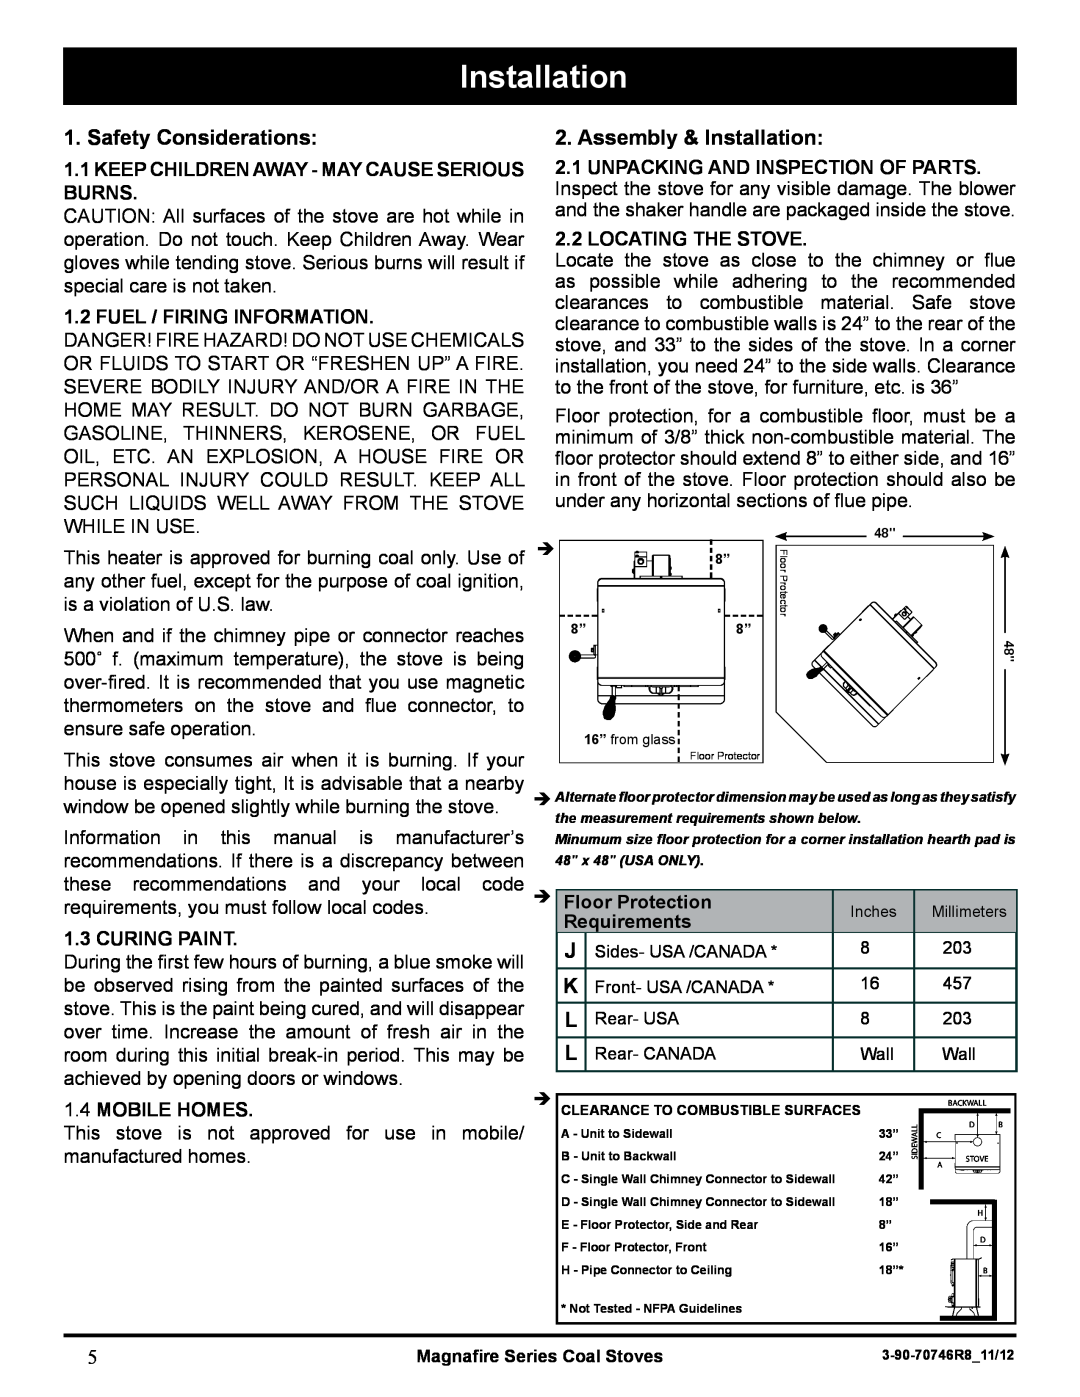 Harman Stove Company MARK III Safety Considerations, Assembly & Installation, Unpacking And Inspection Of Parts, Burns 